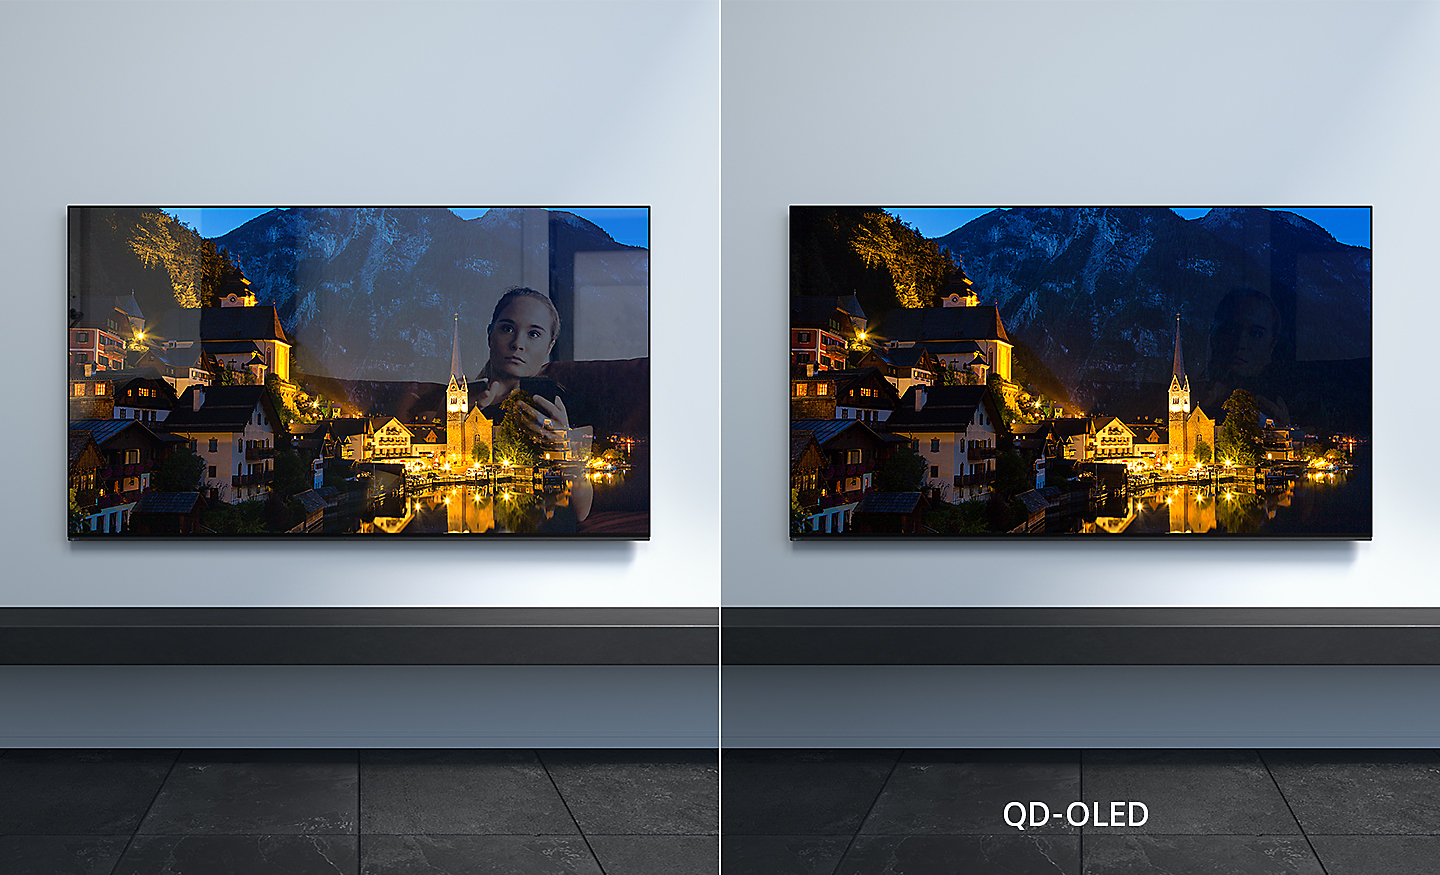 Two wall-mounted BRAVIA TVs with right image showing how QD-OLED reduces glare and reflection